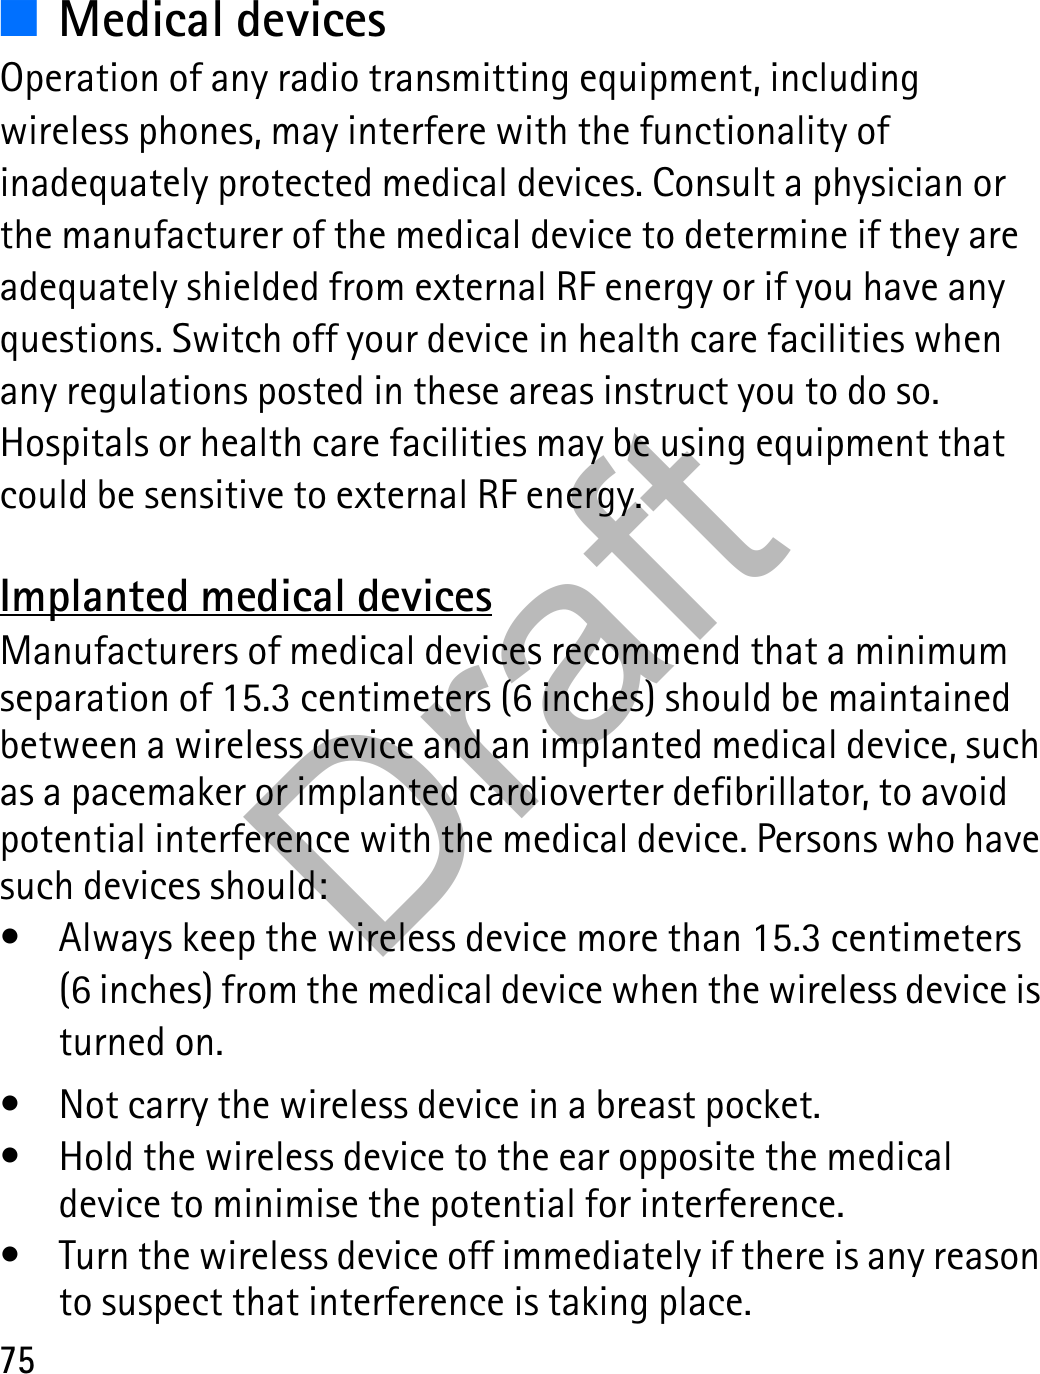 75■Medical devicesOperation of any radio transmitting equipment, including wireless phones, may interfere with the functionality of inadequately protected medical devices. Consult a physician or the manufacturer of the medical device to determine if they are adequately shielded from external RF energy or if you have any questions. Switch off your device in health care facilities when any regulations posted in these areas instruct you to do so. Hospitals or health care facilities may be using equipment that could be sensitive to external RF energy.Implanted medical devicesManufacturers of medical devices recommend that a minimum separation of 15.3 centimeters (6 inches) should be maintained between a wireless device and an implanted medical device, such as a pacemaker or implanted cardioverter defibrillator, to avoid potential interference with the medical device. Persons who have such devices should:• Always keep the wireless device more than 15.3 centimeters (6 inches) from the medical device when the wireless device is turned on.• Not carry the wireless device in a breast pocket.• Hold the wireless device to the ear opposite the medical device to minimise the potential for interference.• Turn the wireless device off immediately if there is any reason to suspect that interference is taking place.Draft